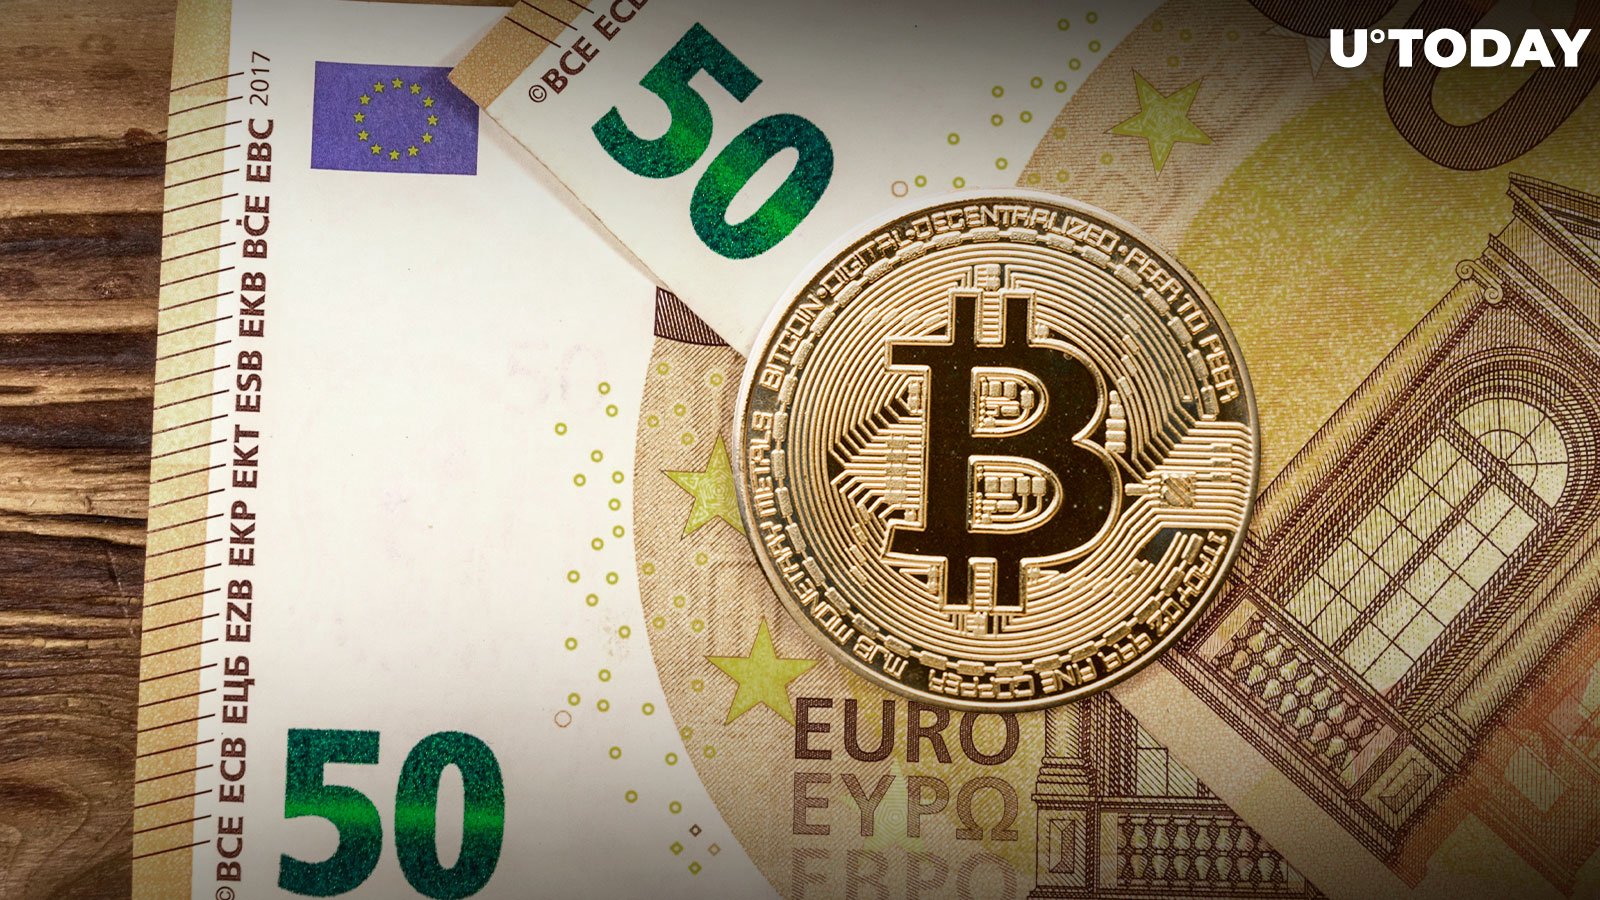 Bitcoin (BTC) Hits New Peak in Euro; Which Fiat Currencies Are Left?